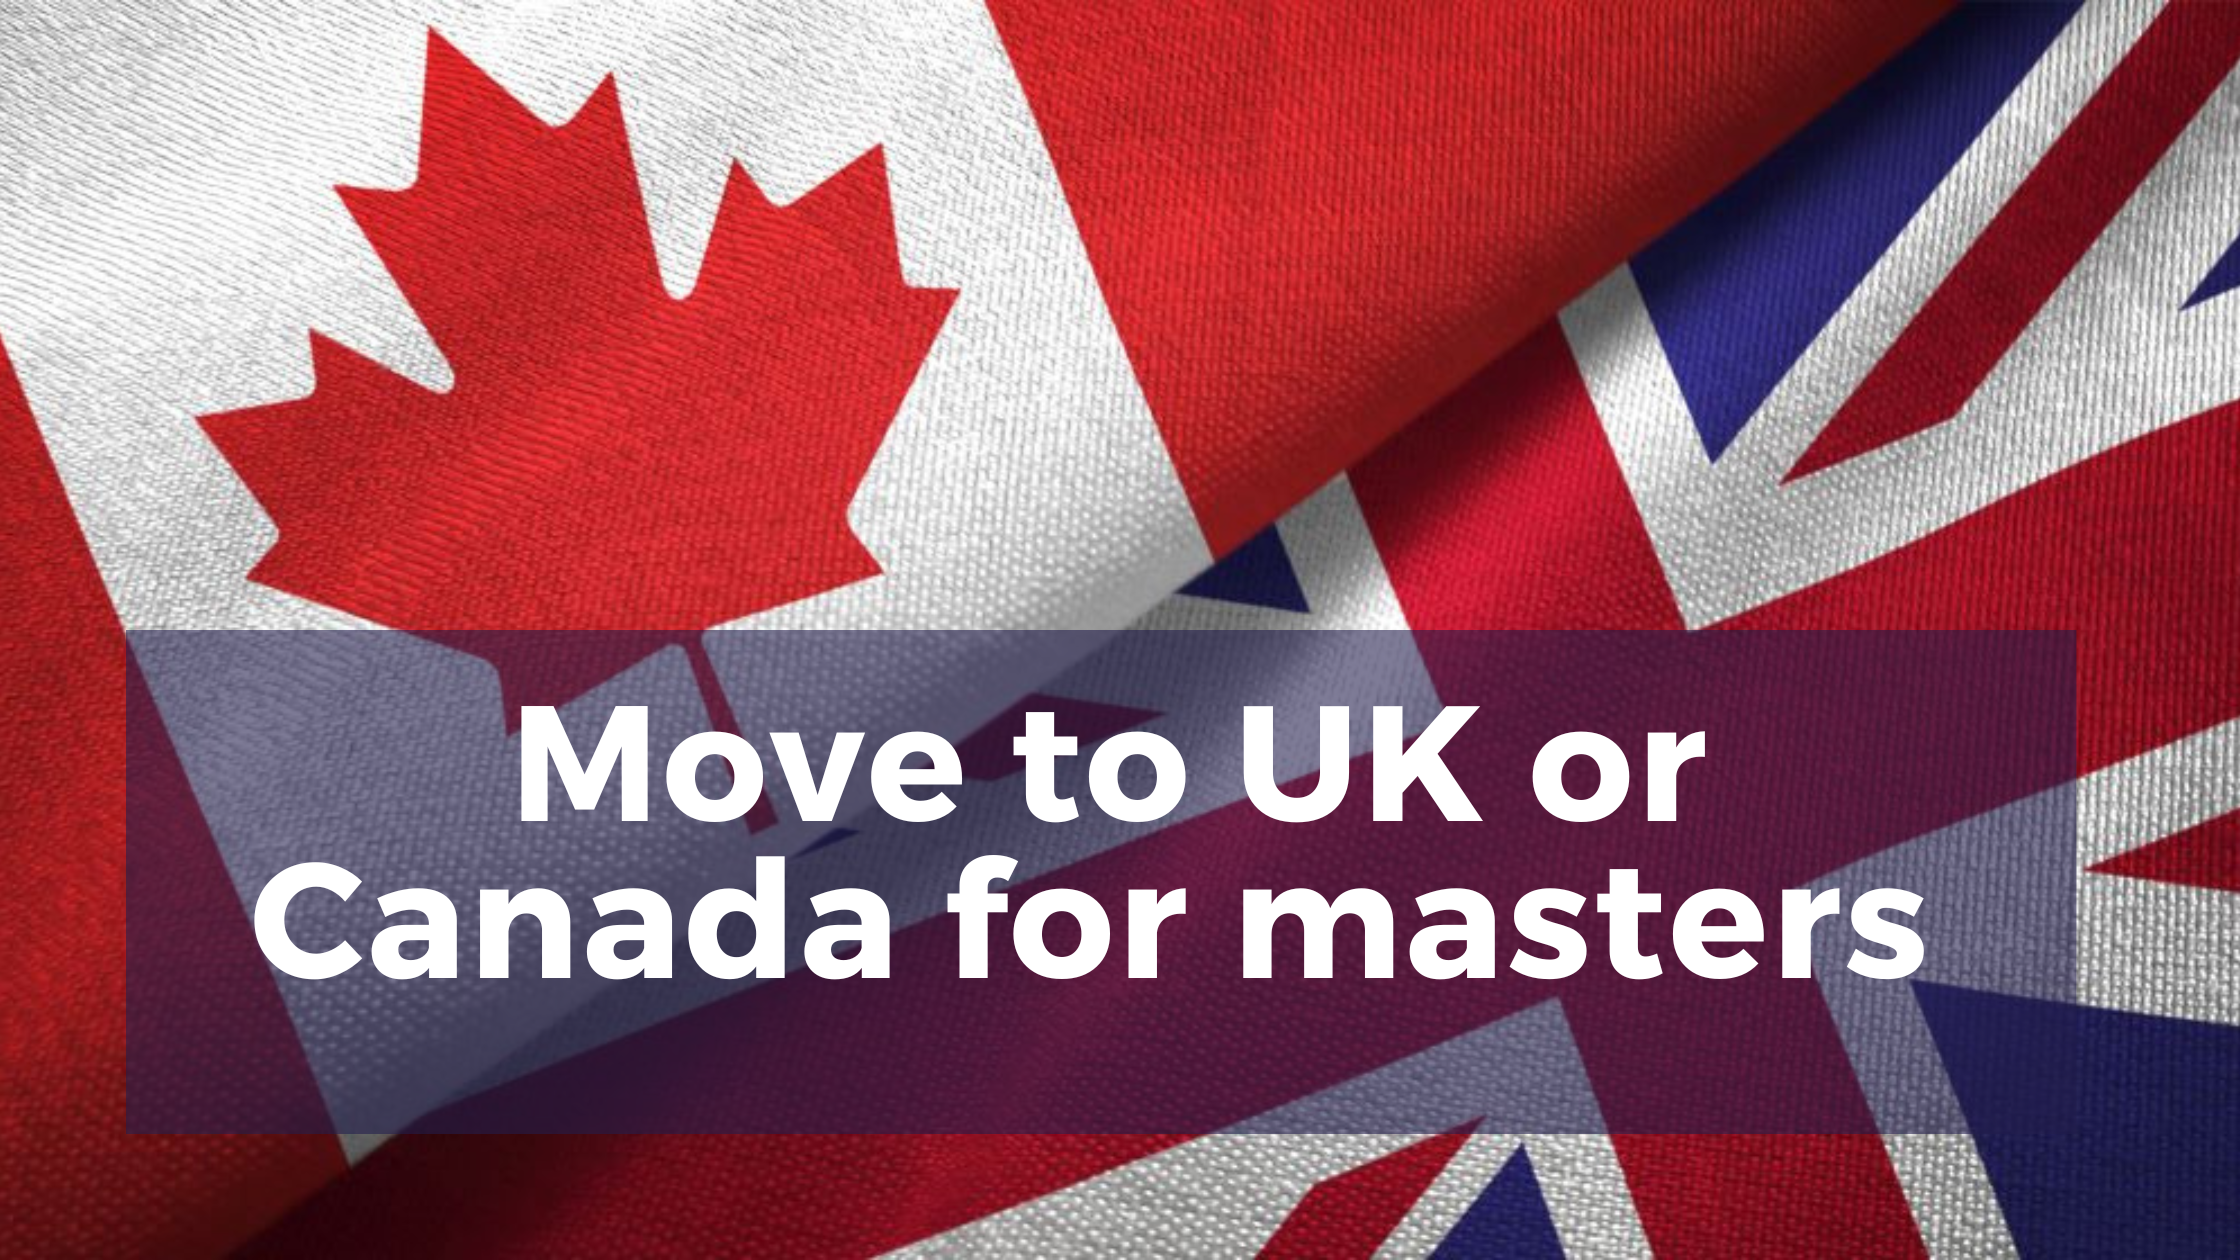 uk or canada for masters